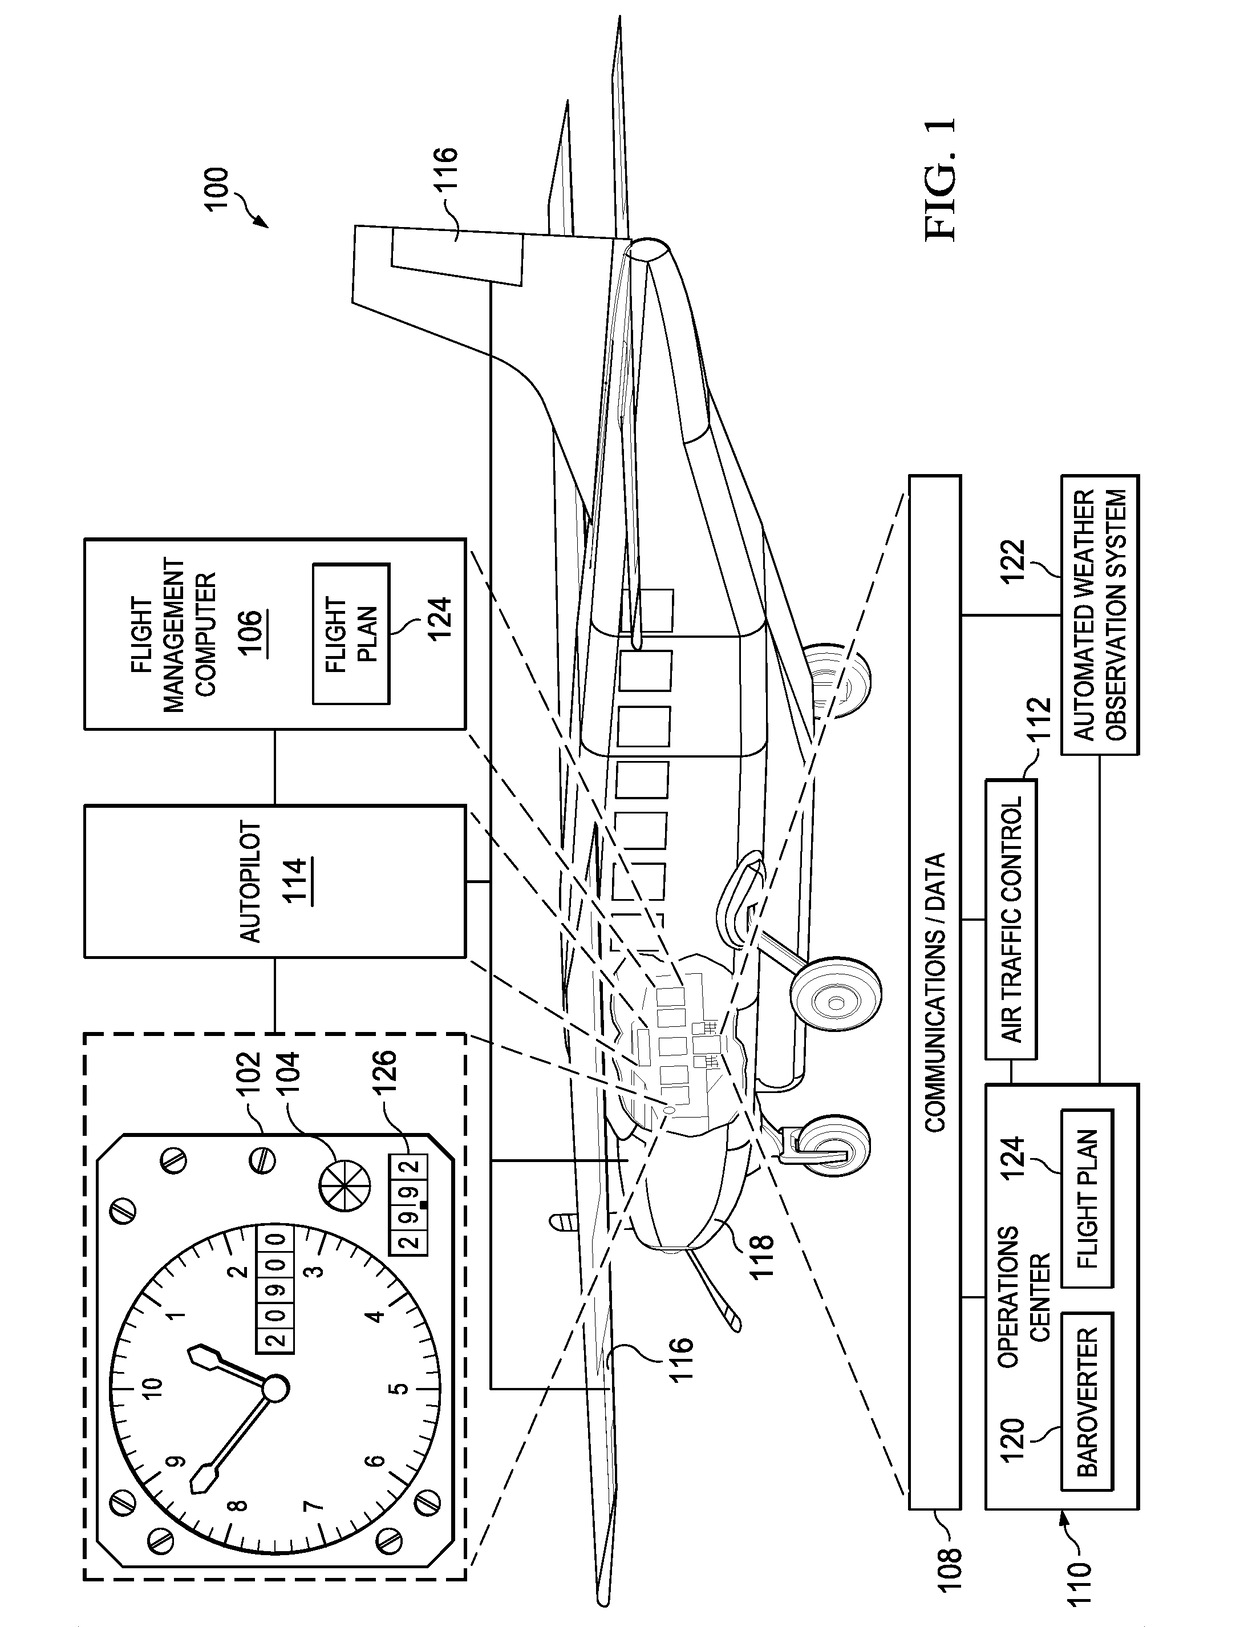 Process and Machine for Aircraft Altitude Control